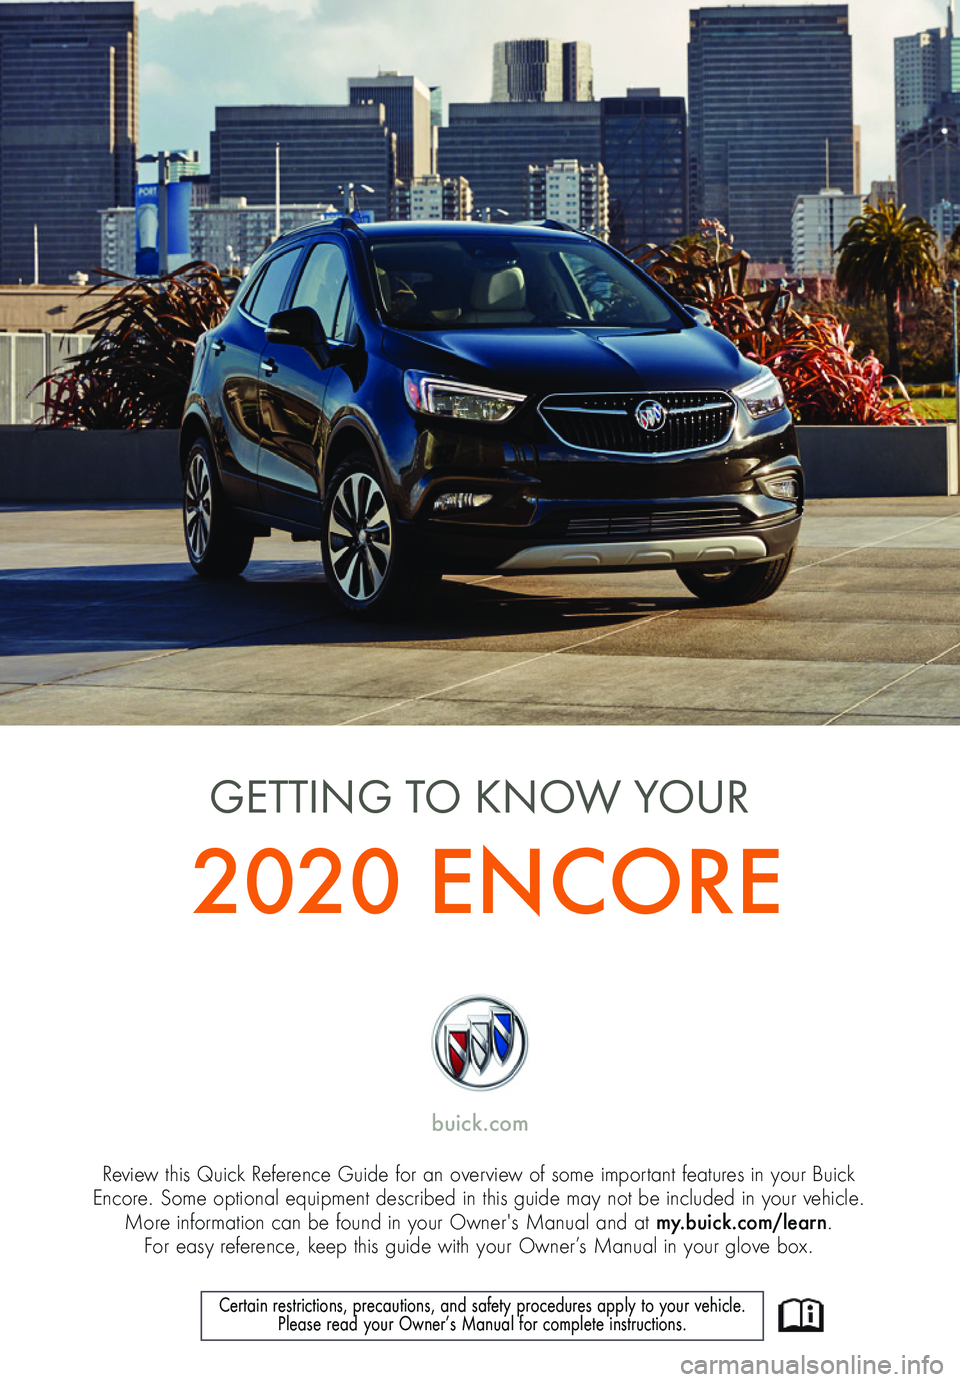 BUICK ENCORE 2020  Get To Know Guide 1
Review this Quick Reference Guide for an overview of some important features in your Buick  Encore. Some optional equipment described in this guide may not be included in your vehicle.  More informa